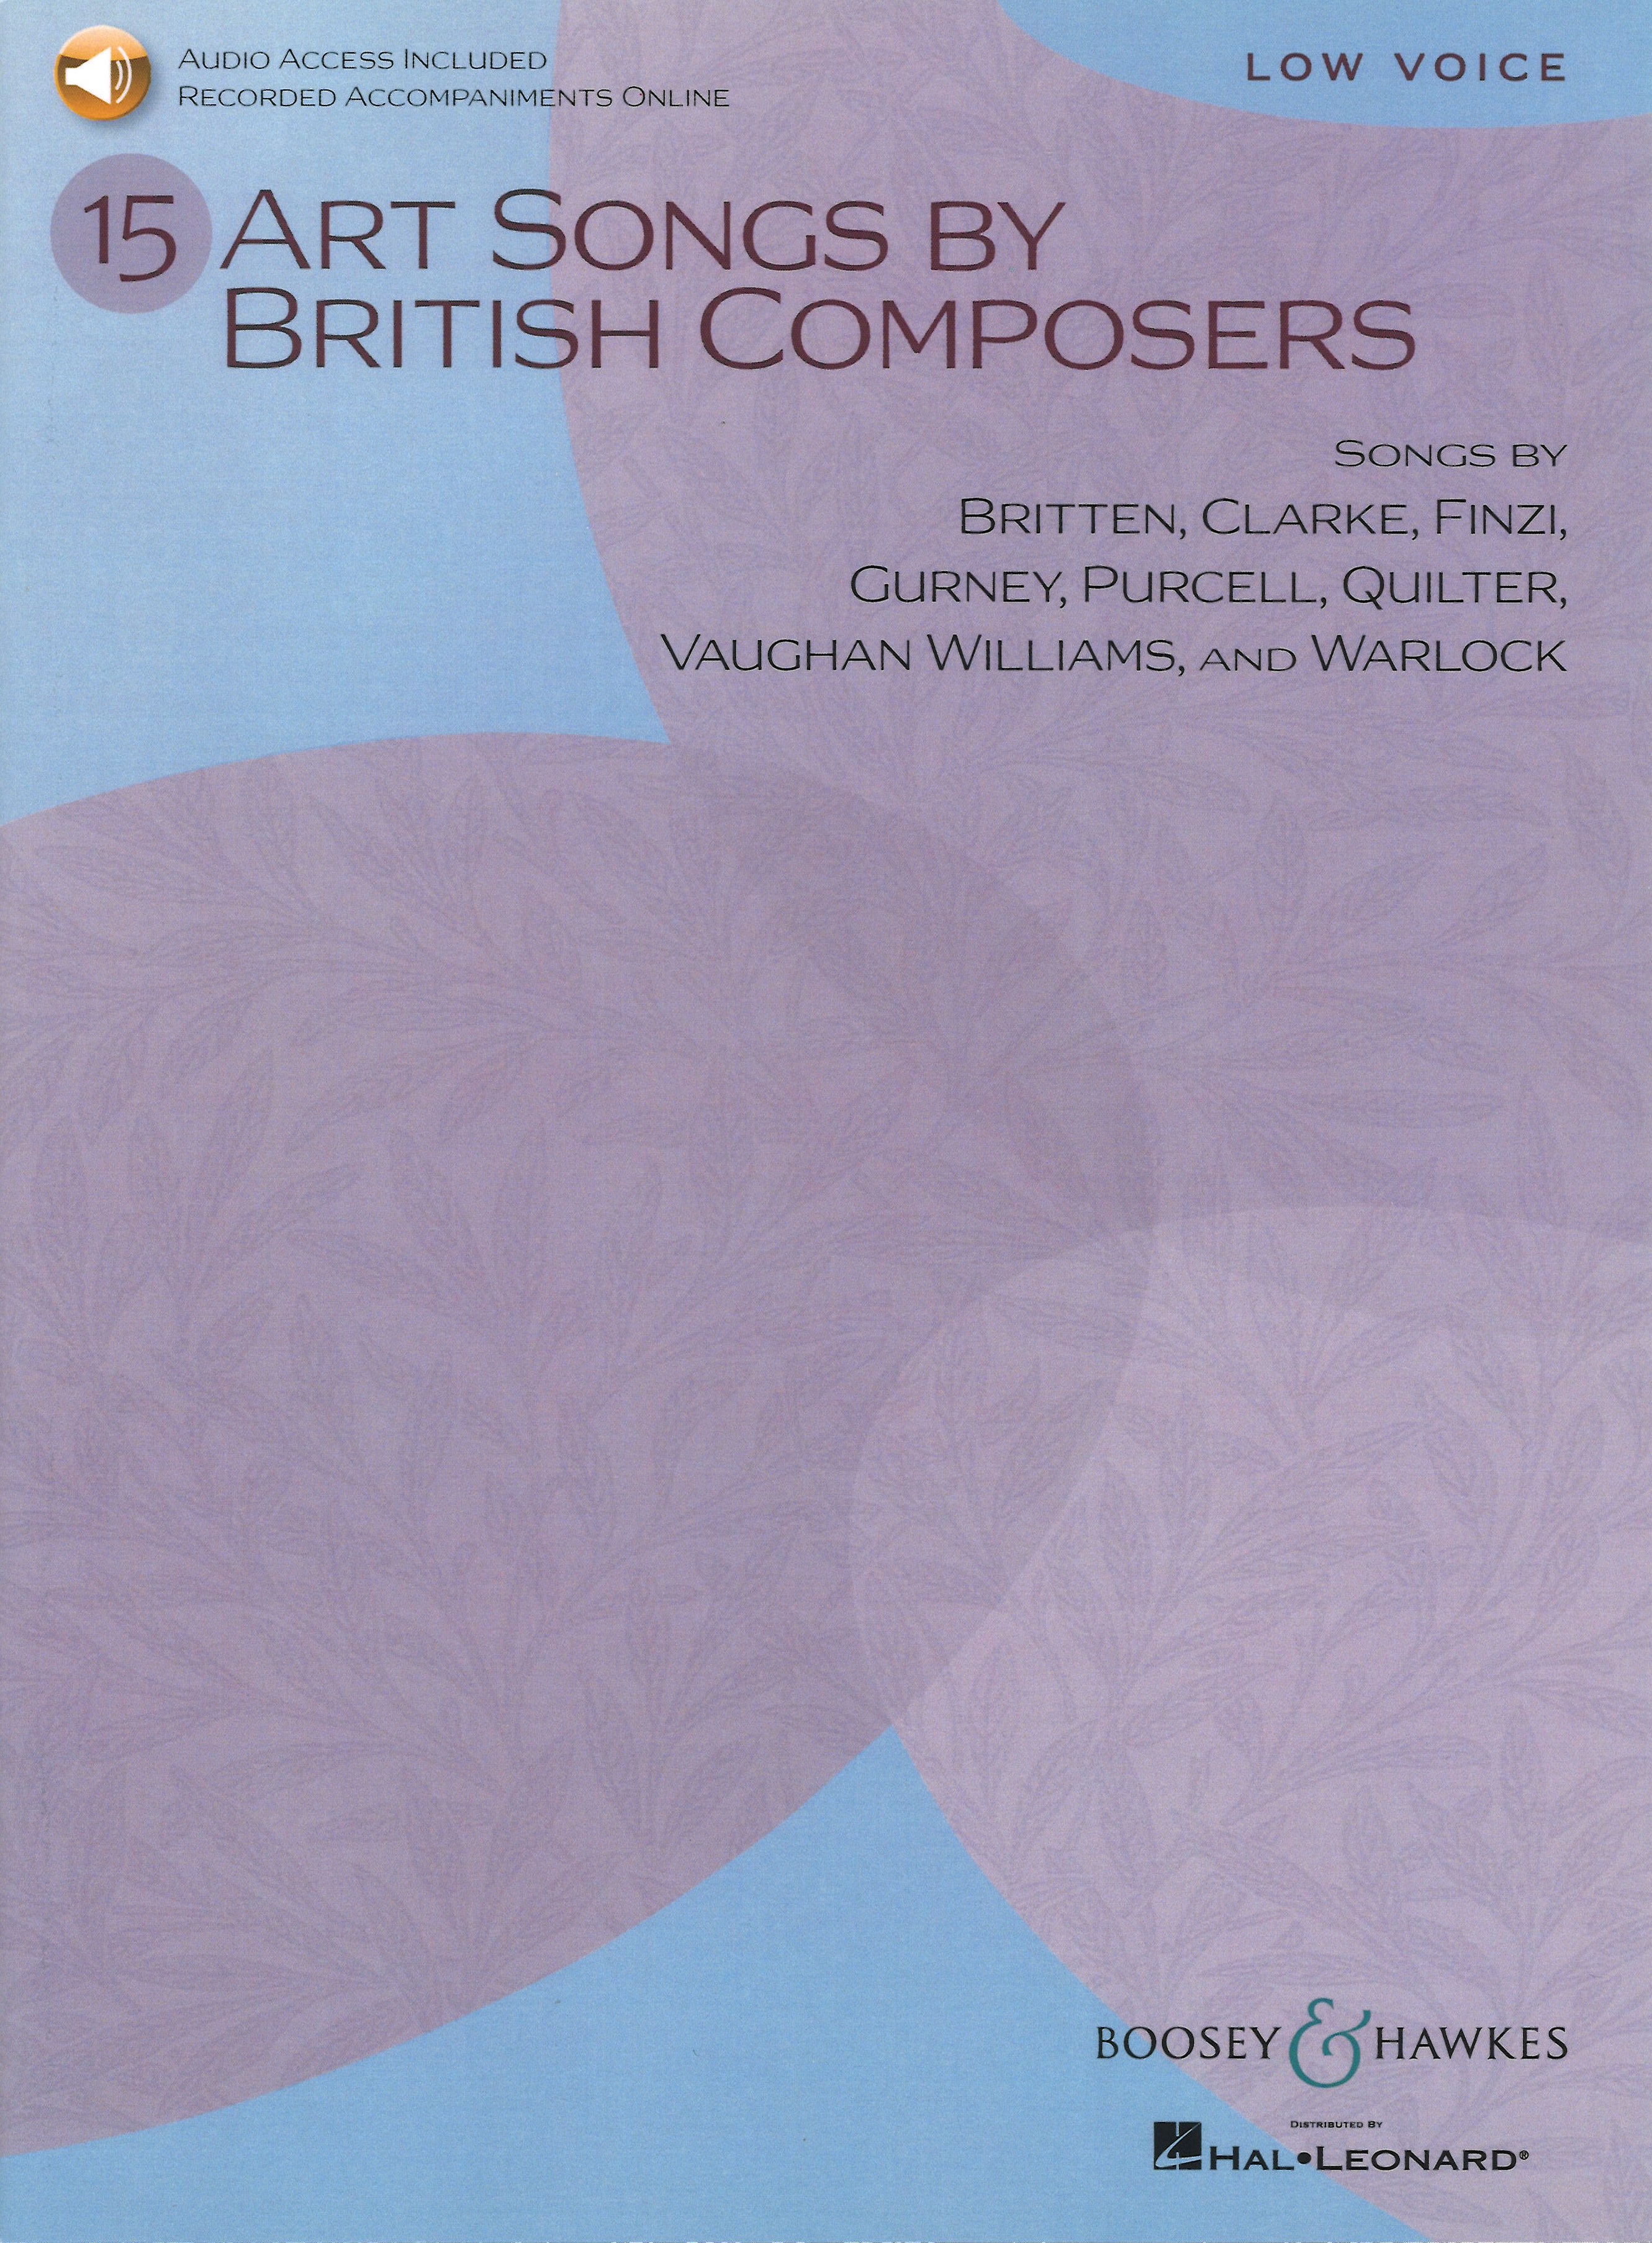 15 Art Songs By British Composers Low Voice/audio Sheet Music Songbook